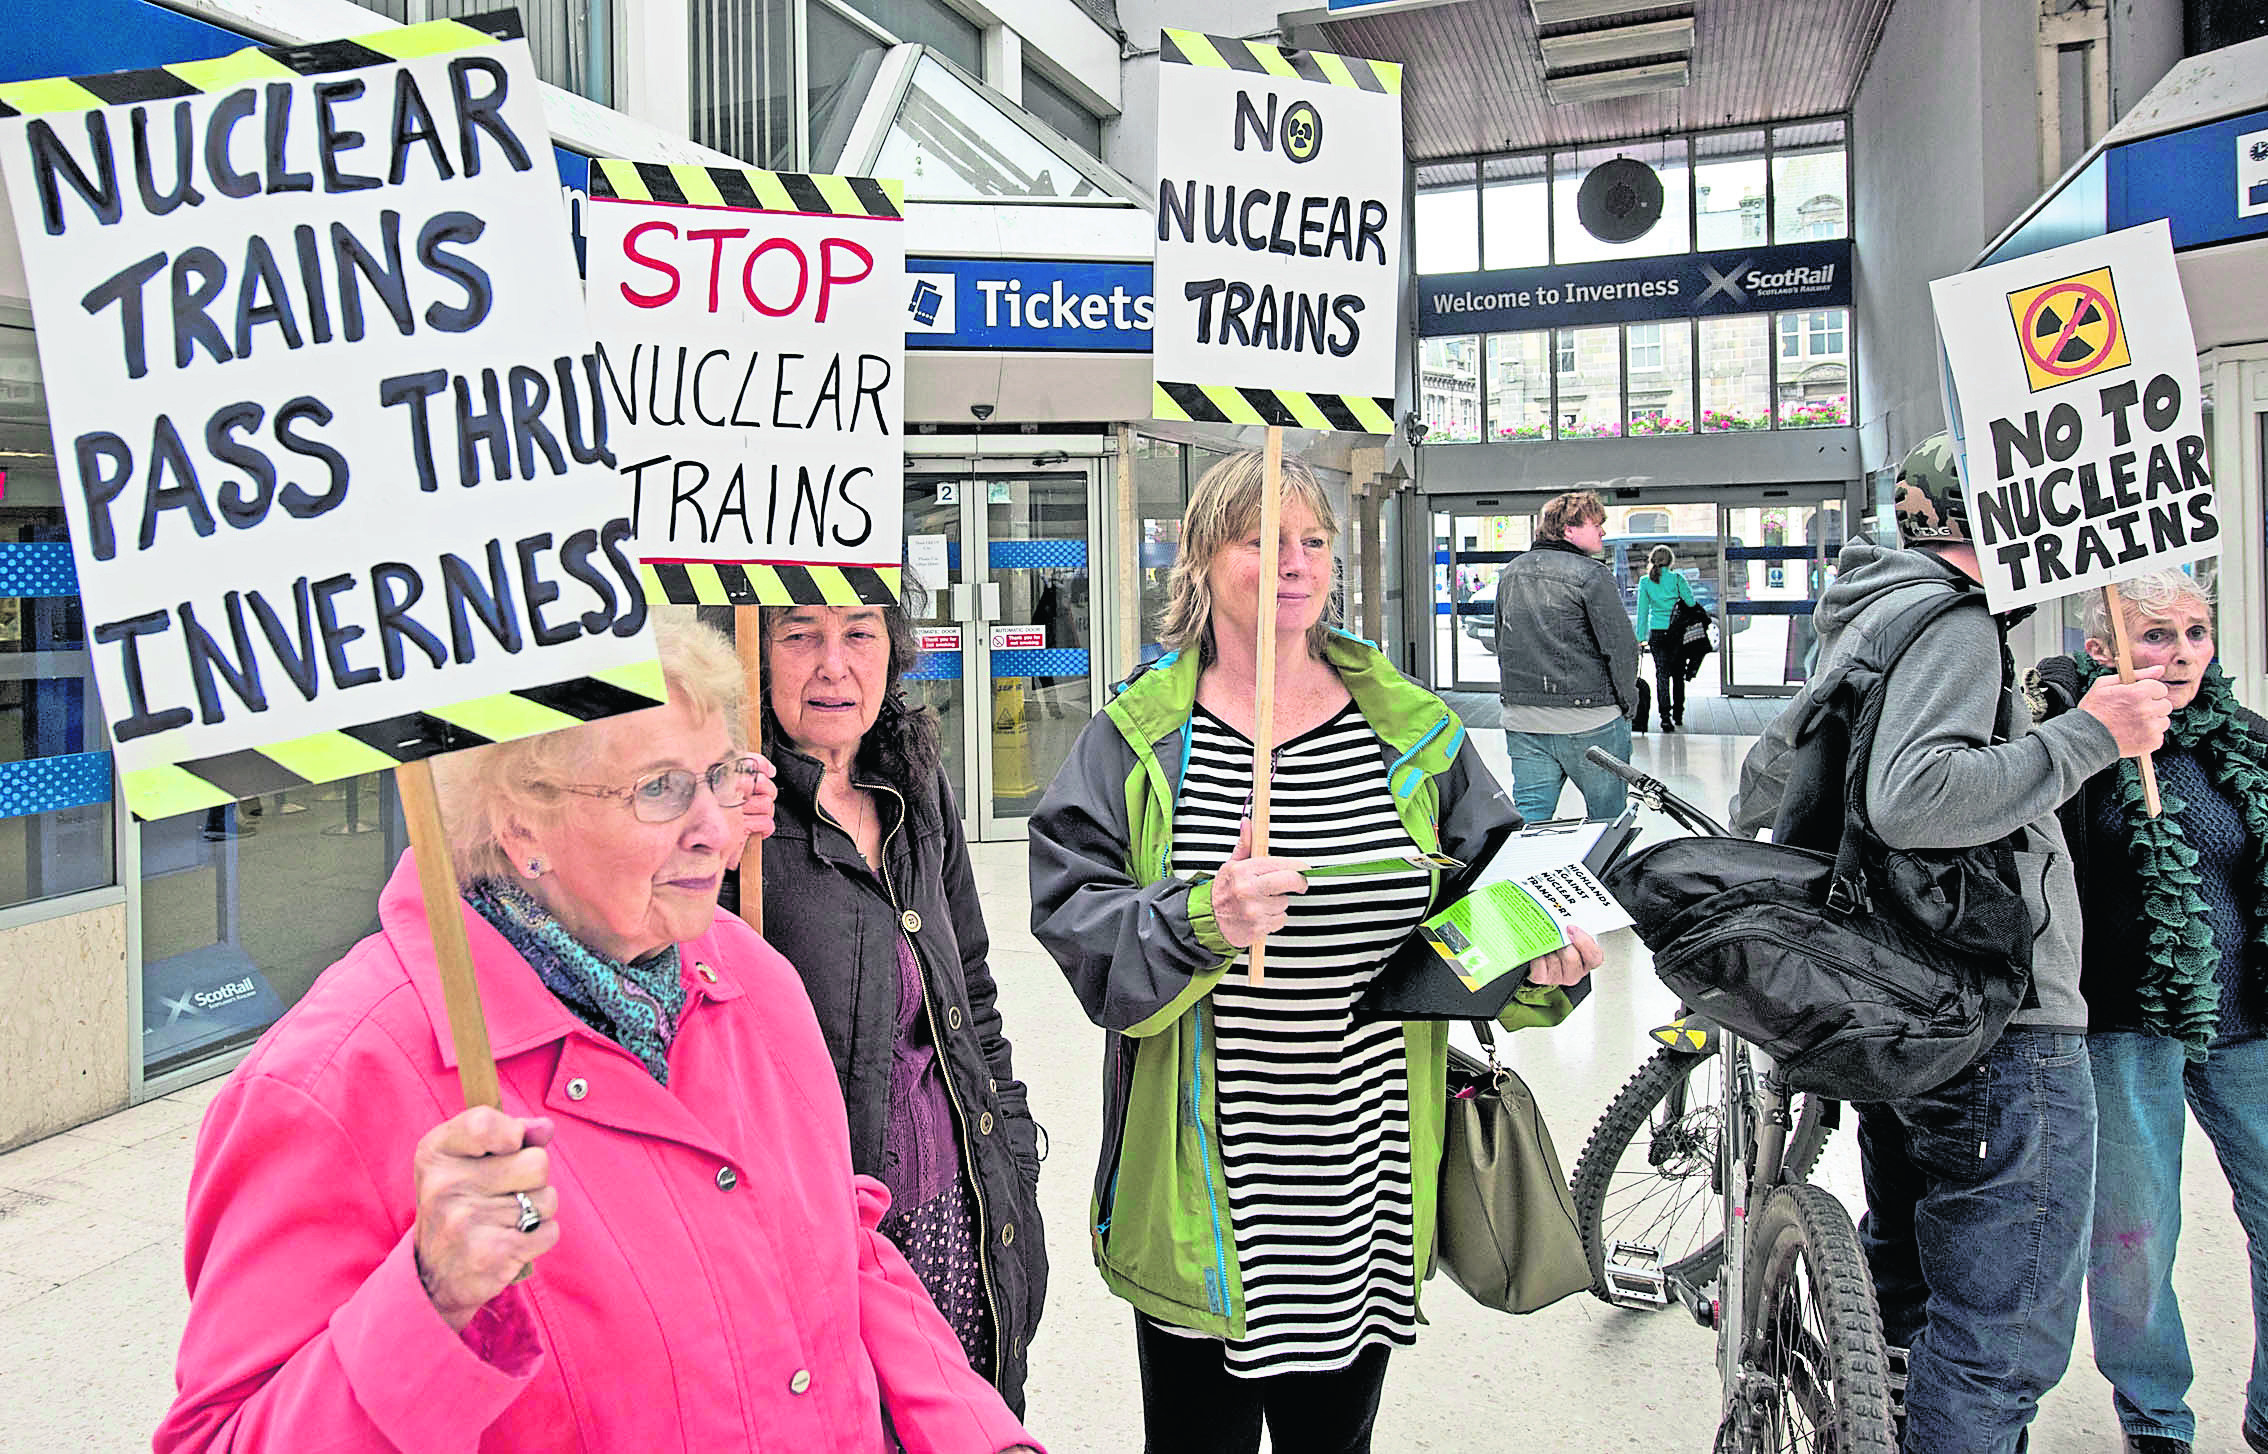 Anti-nuclear protestors showcase public demonstration at the city's train station.